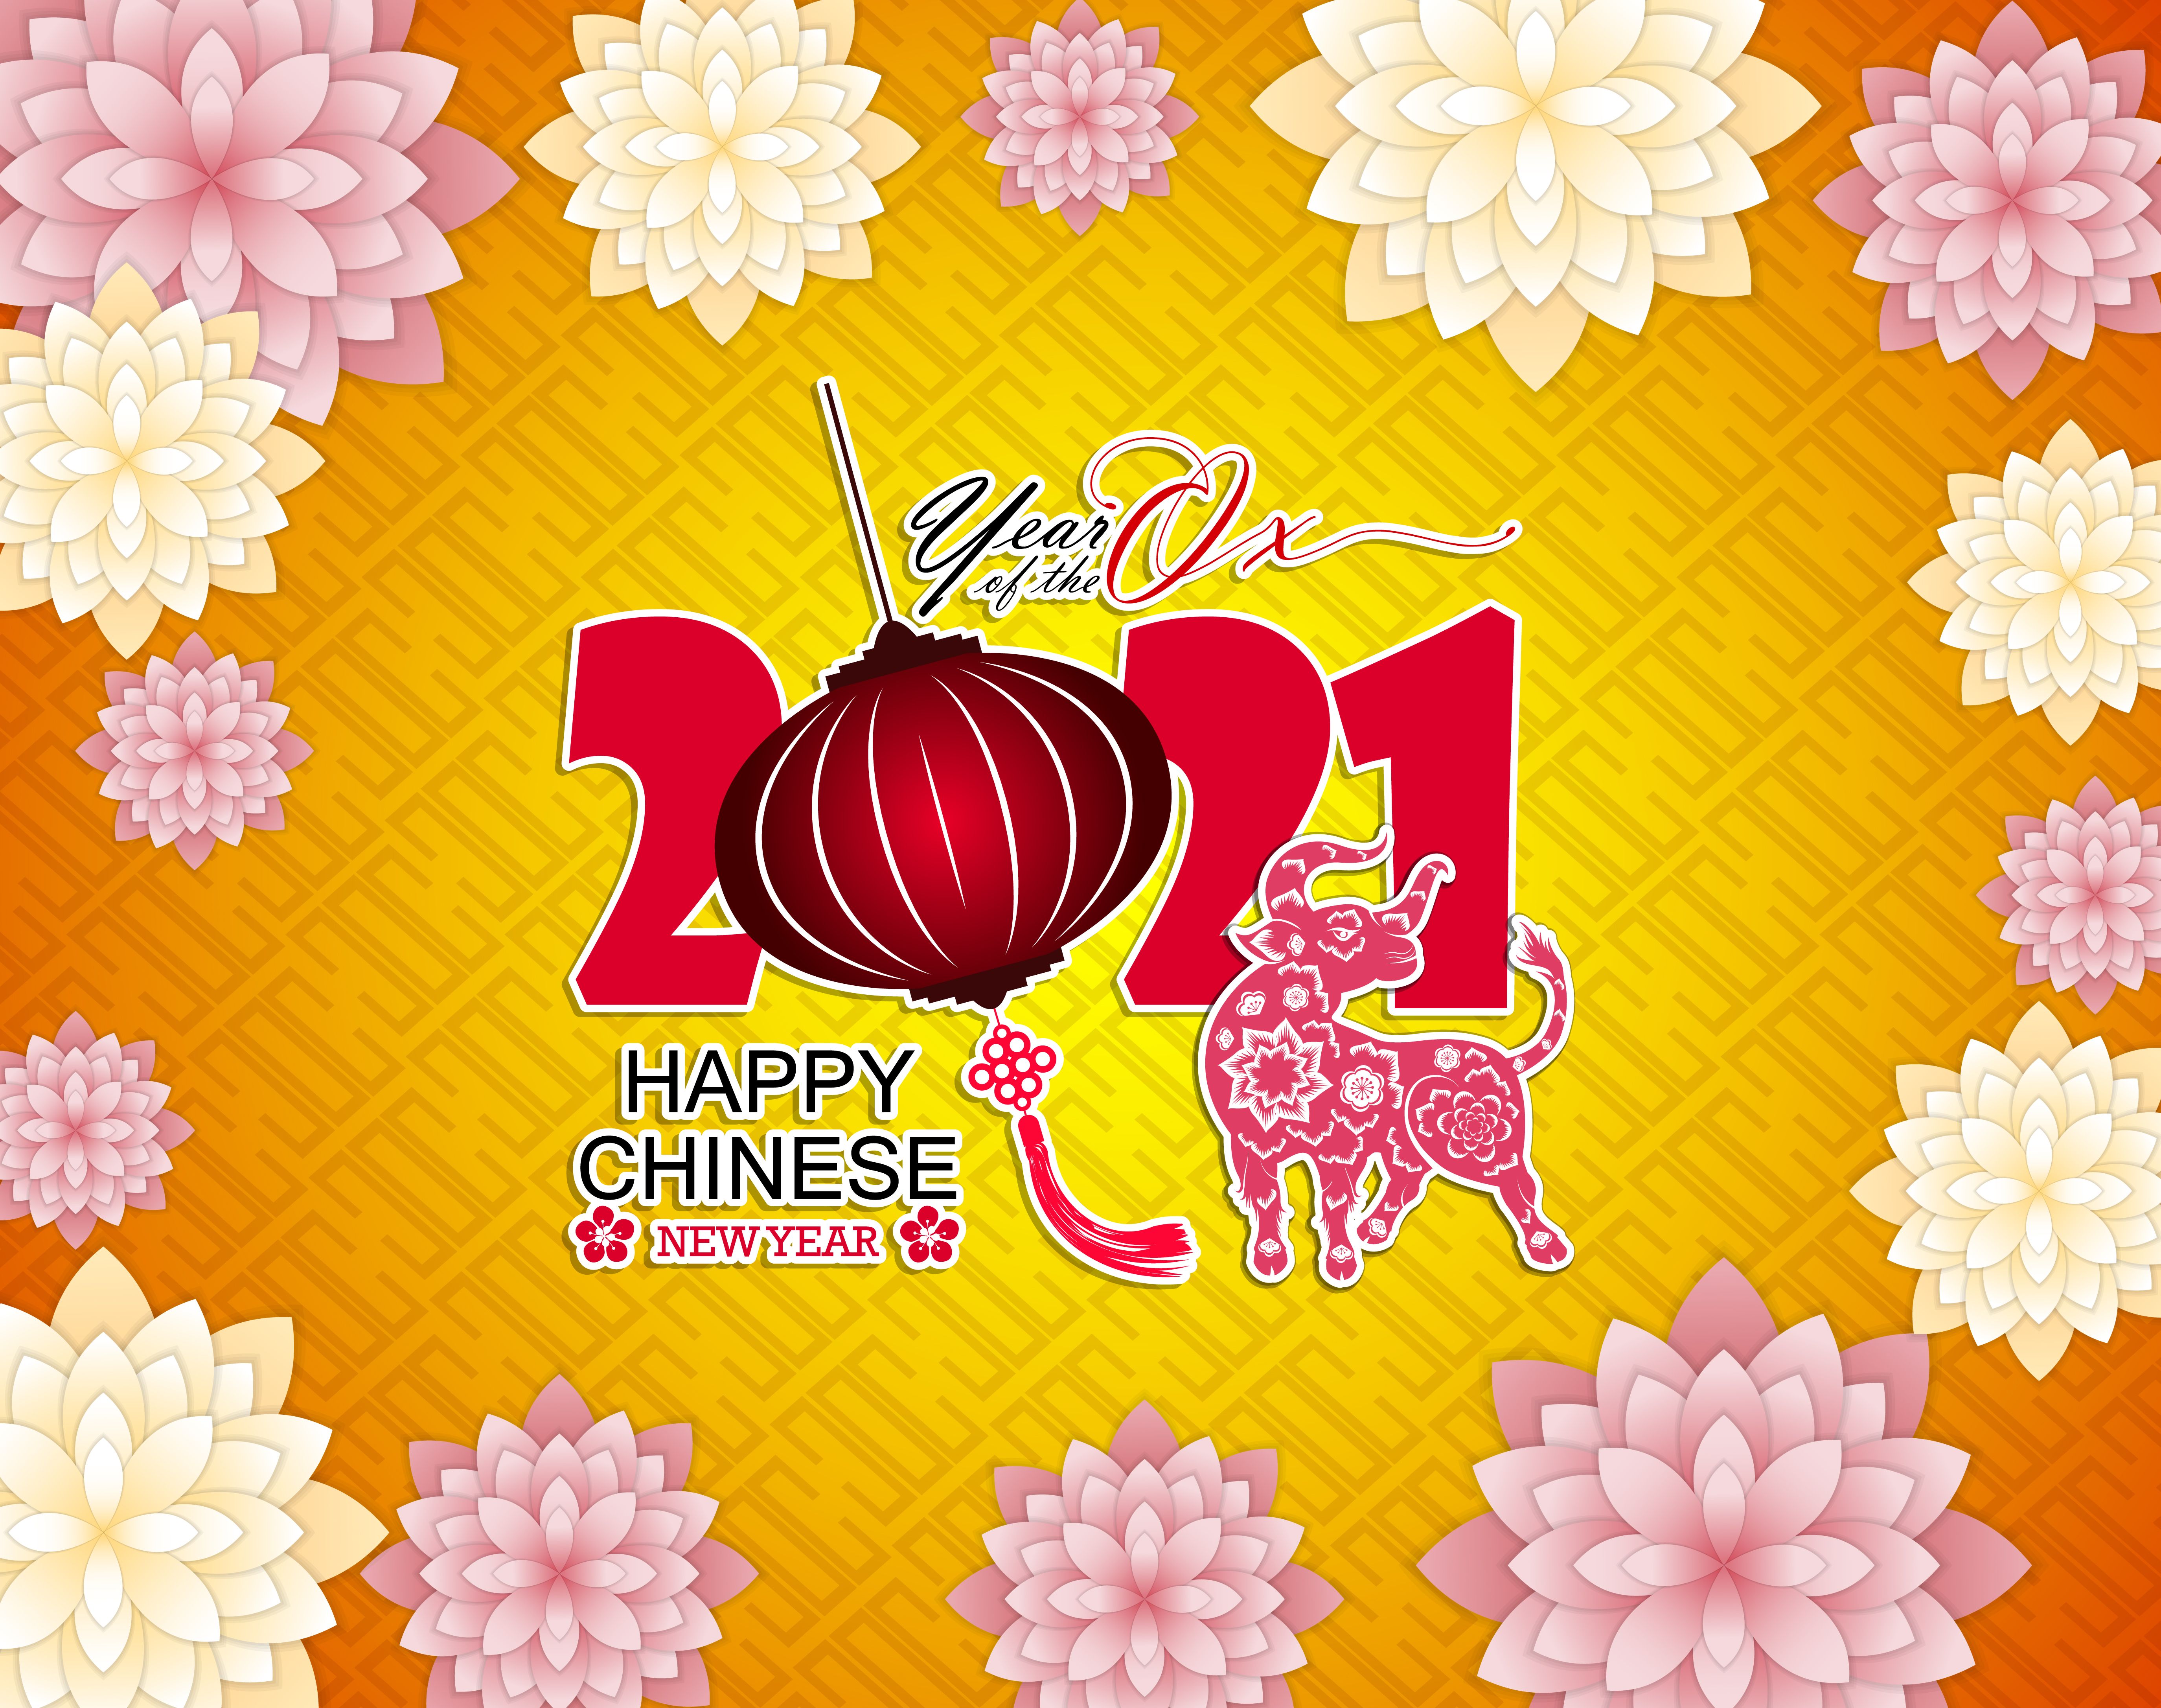 Chinese new year 2021 yellow poster Free Vectors, Clipart Graphics & Vector Art